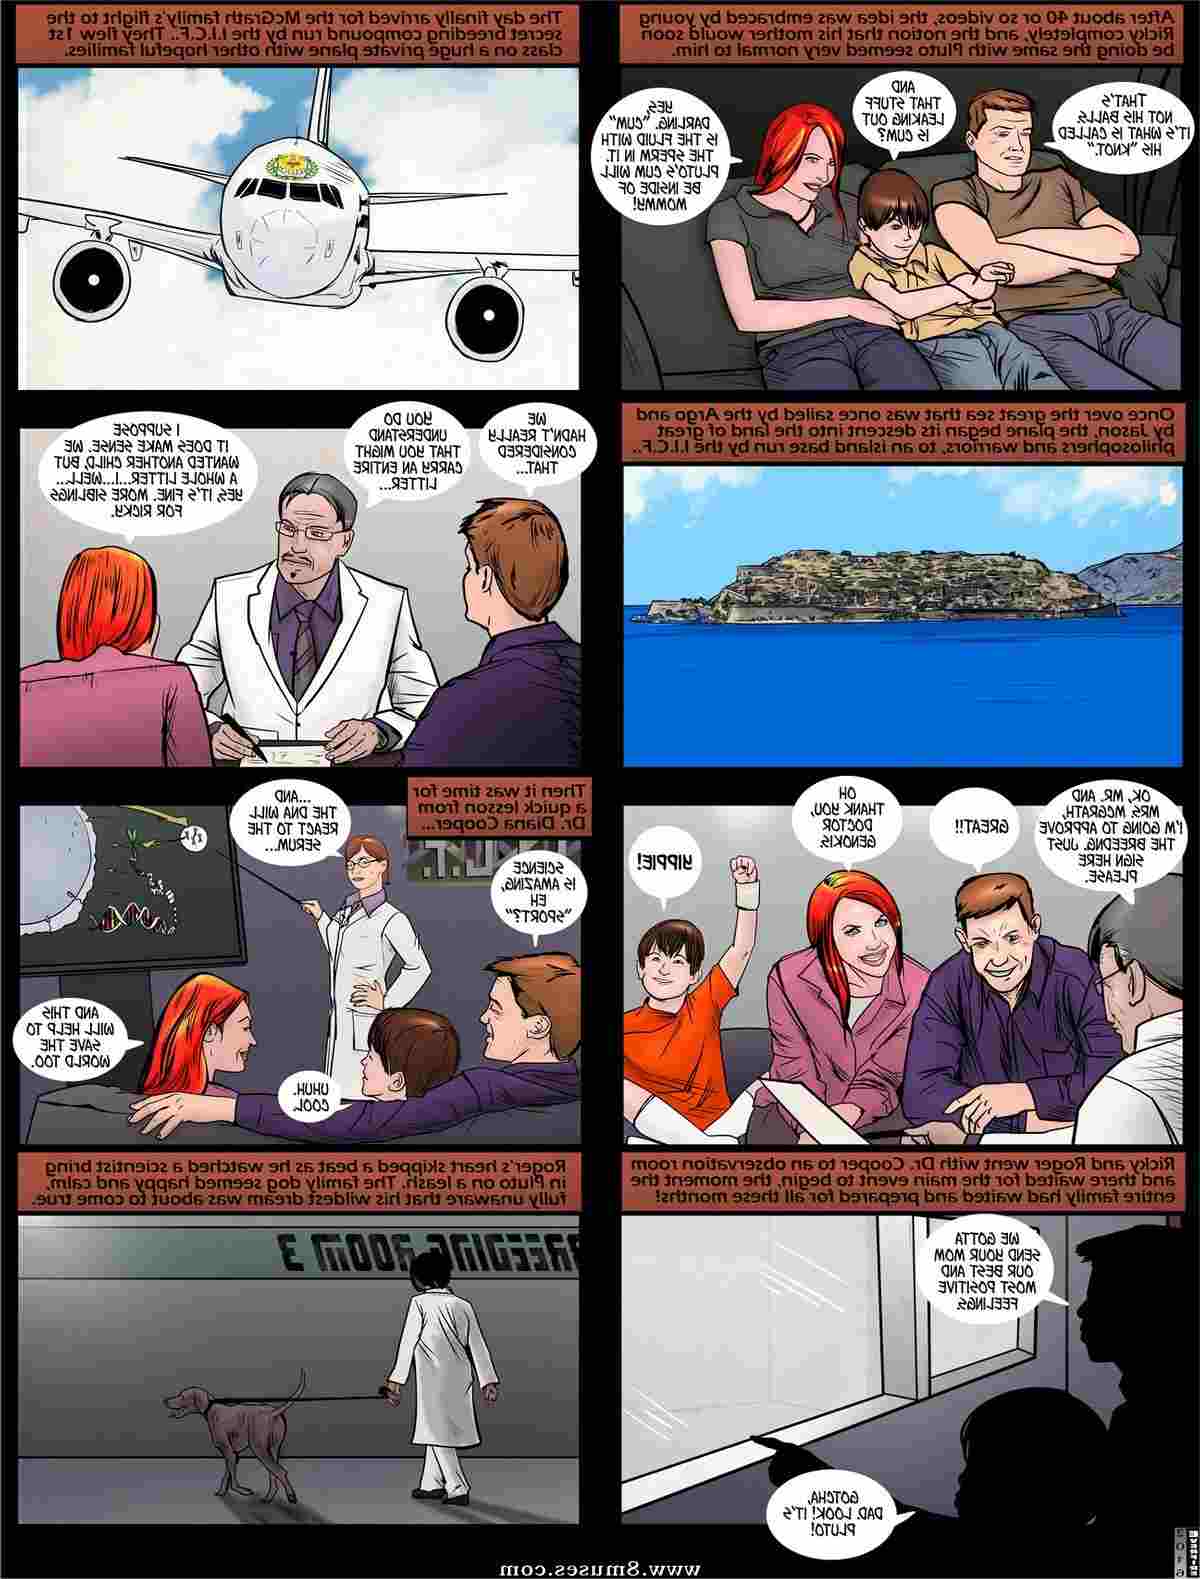 Everfire-Comics/The-New-Dawn The_New_Dawn__8muses_-_Sex_and_Porn_Comics_8.jpg